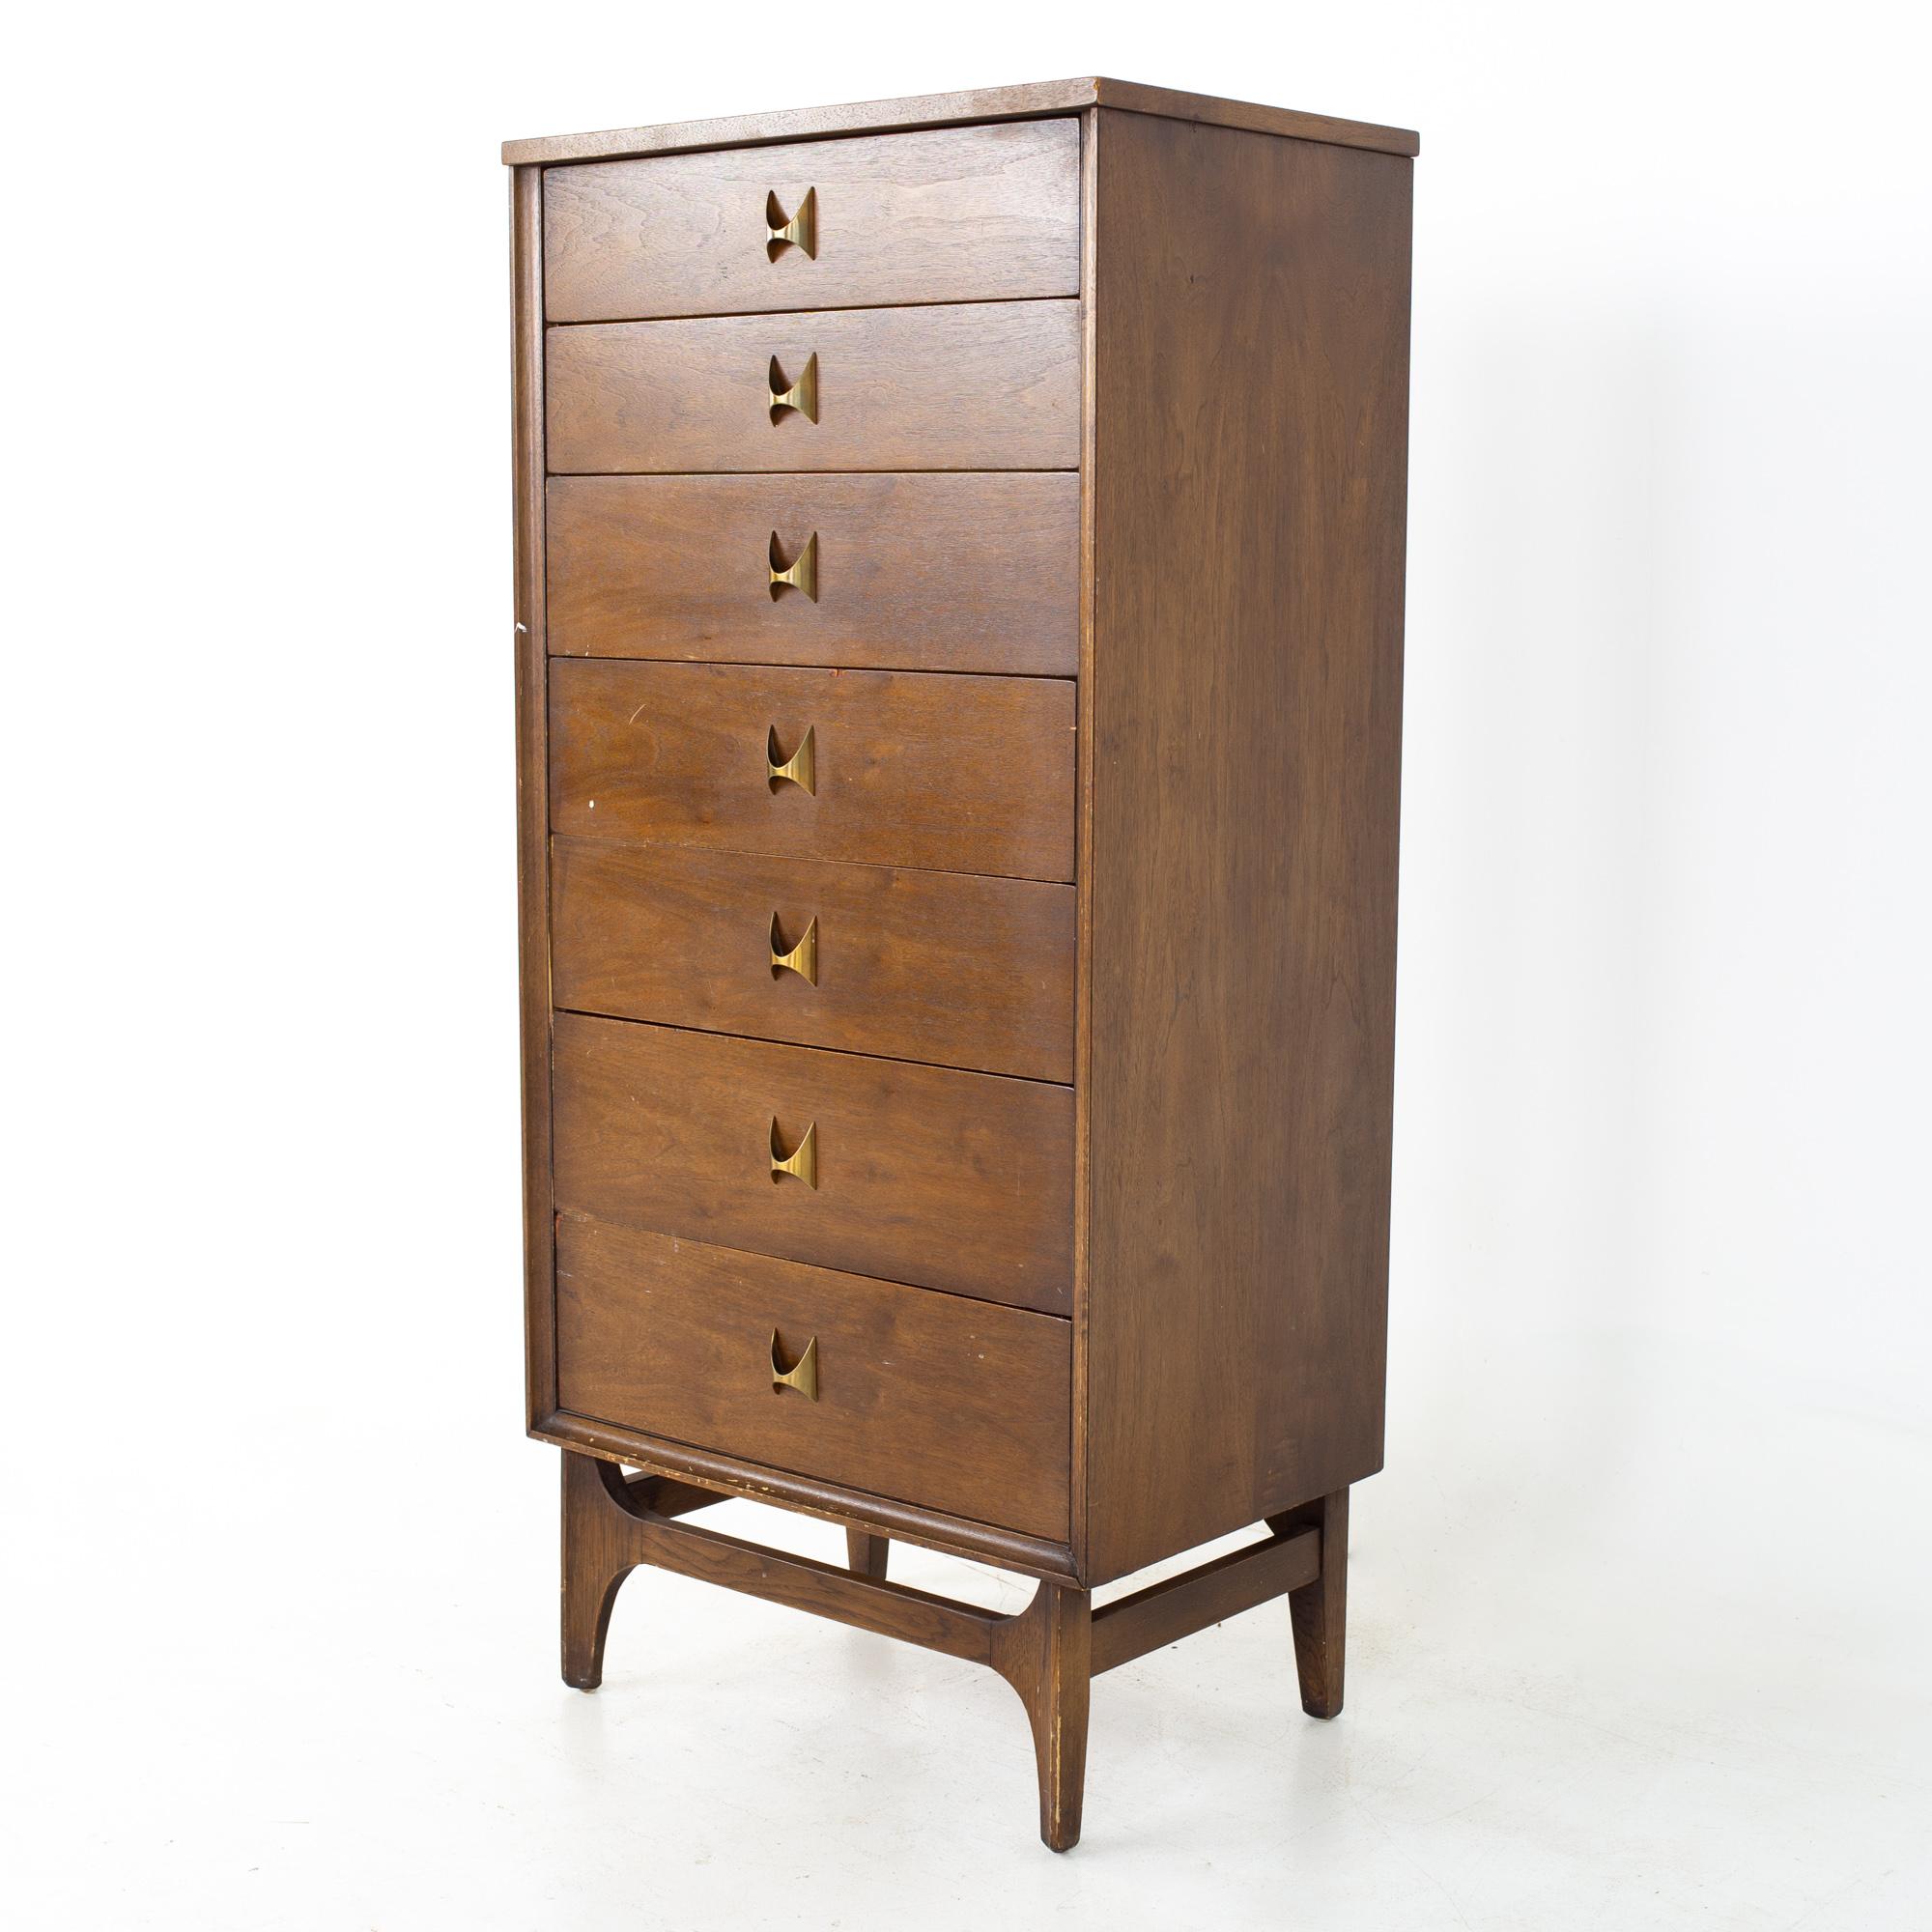 Broyhill Brasilia Brutalist mid century walnut and brass lingerie chest.
Chest measures: 24 wide x 16 deep x 51 inches high

All pieces of furniture can be had in what we call restored vintage condition. That means the piece is restored upon